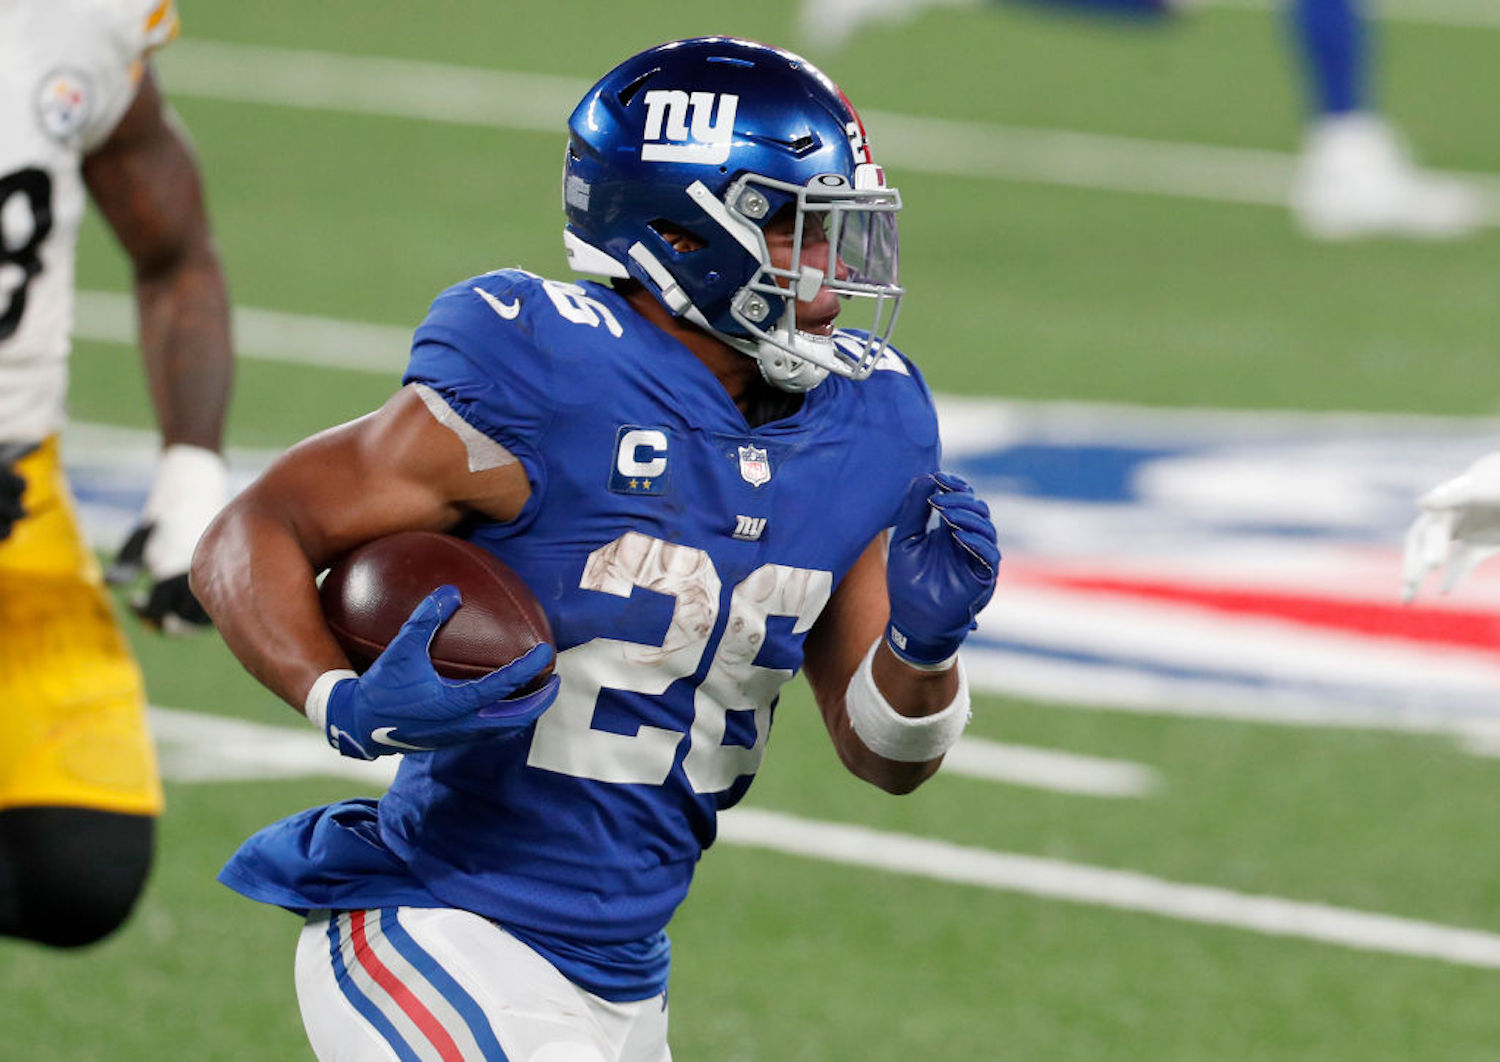 The New York Giants didn't have high hopes for the 2020 season, but things just went from bad to worse with the loss of Saquon Barkley.